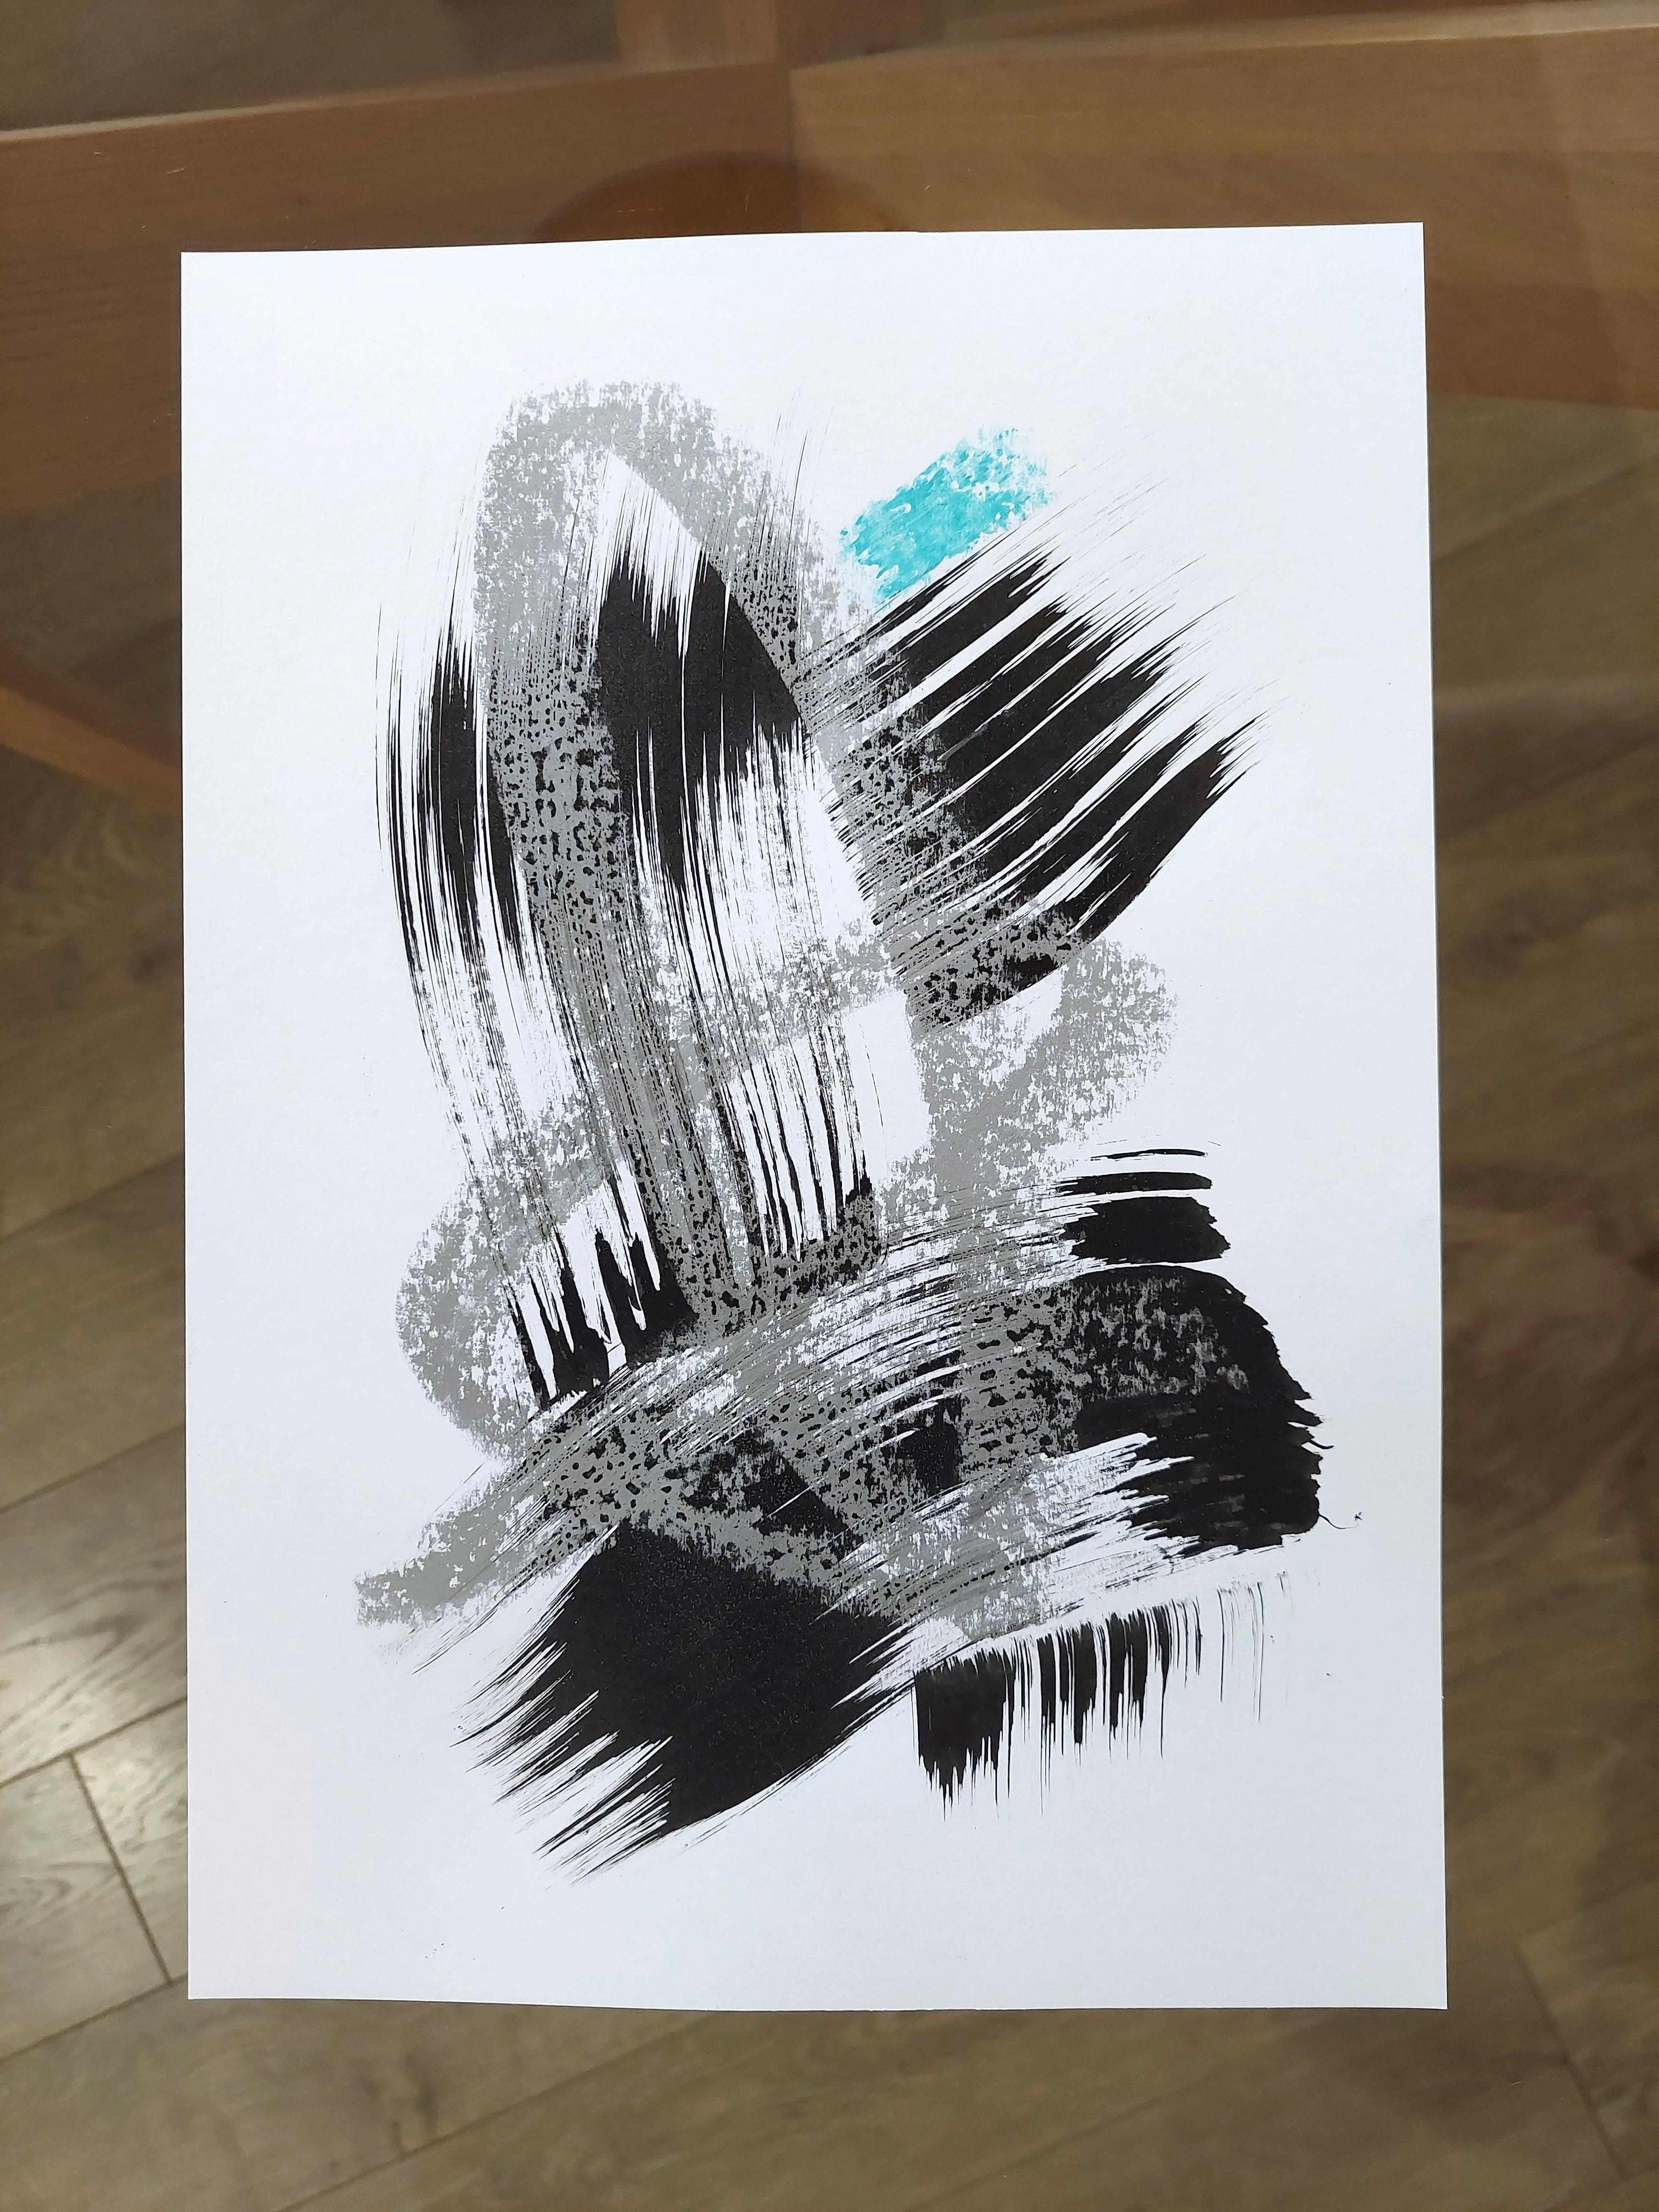 This spontaneous gestural drawing is made with Chinese ink and silver pastel on heavy white paper. Looking at it you can feel the freshness of instant impulse and the charge of cheerful energy! I danced a lot the day I drew this series of drawings,